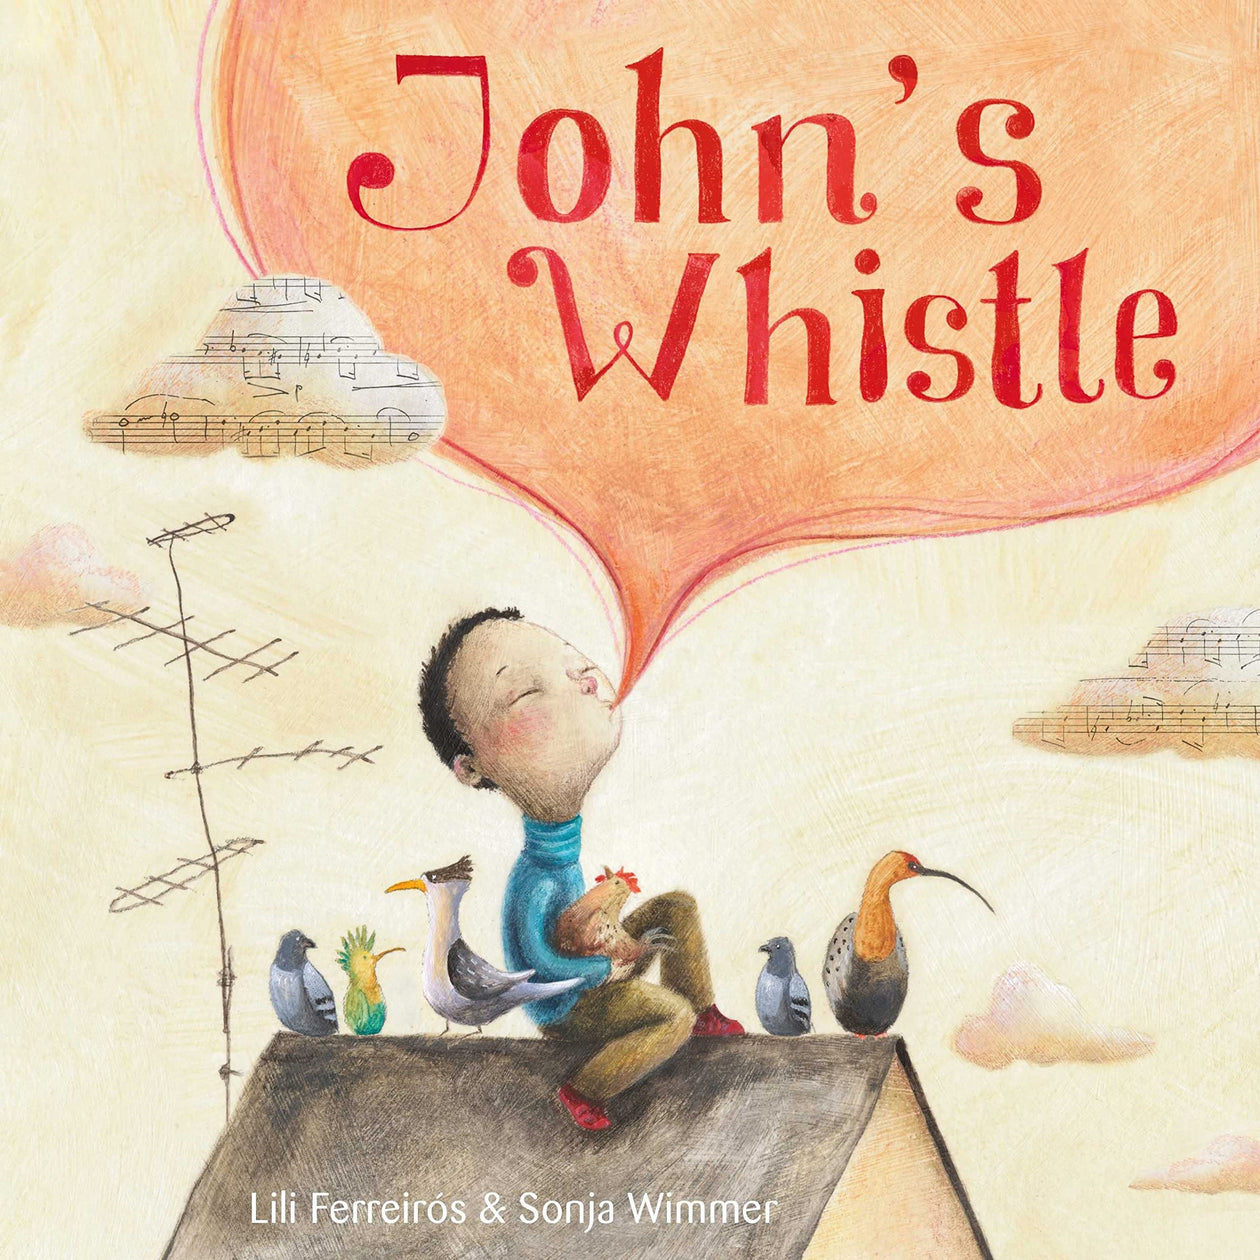 John's Whistle by Lili Ferreiros, illustrated by Sonja Wimmer